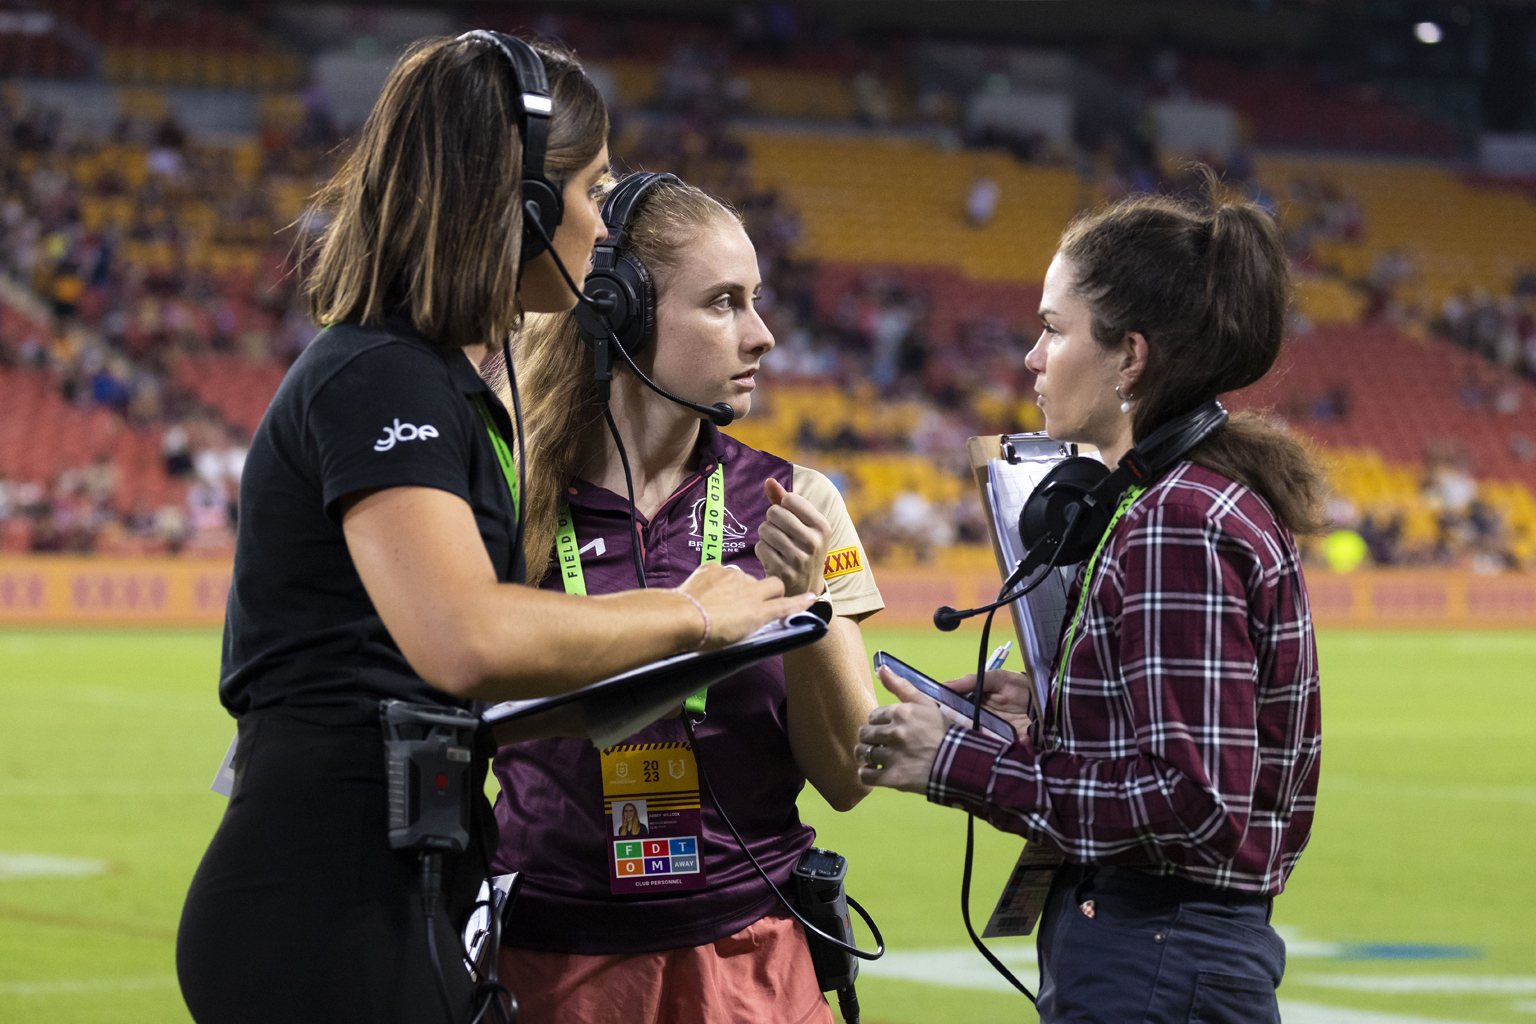 Three women on a sports field wearing communication headsets  and carrying clipboards.